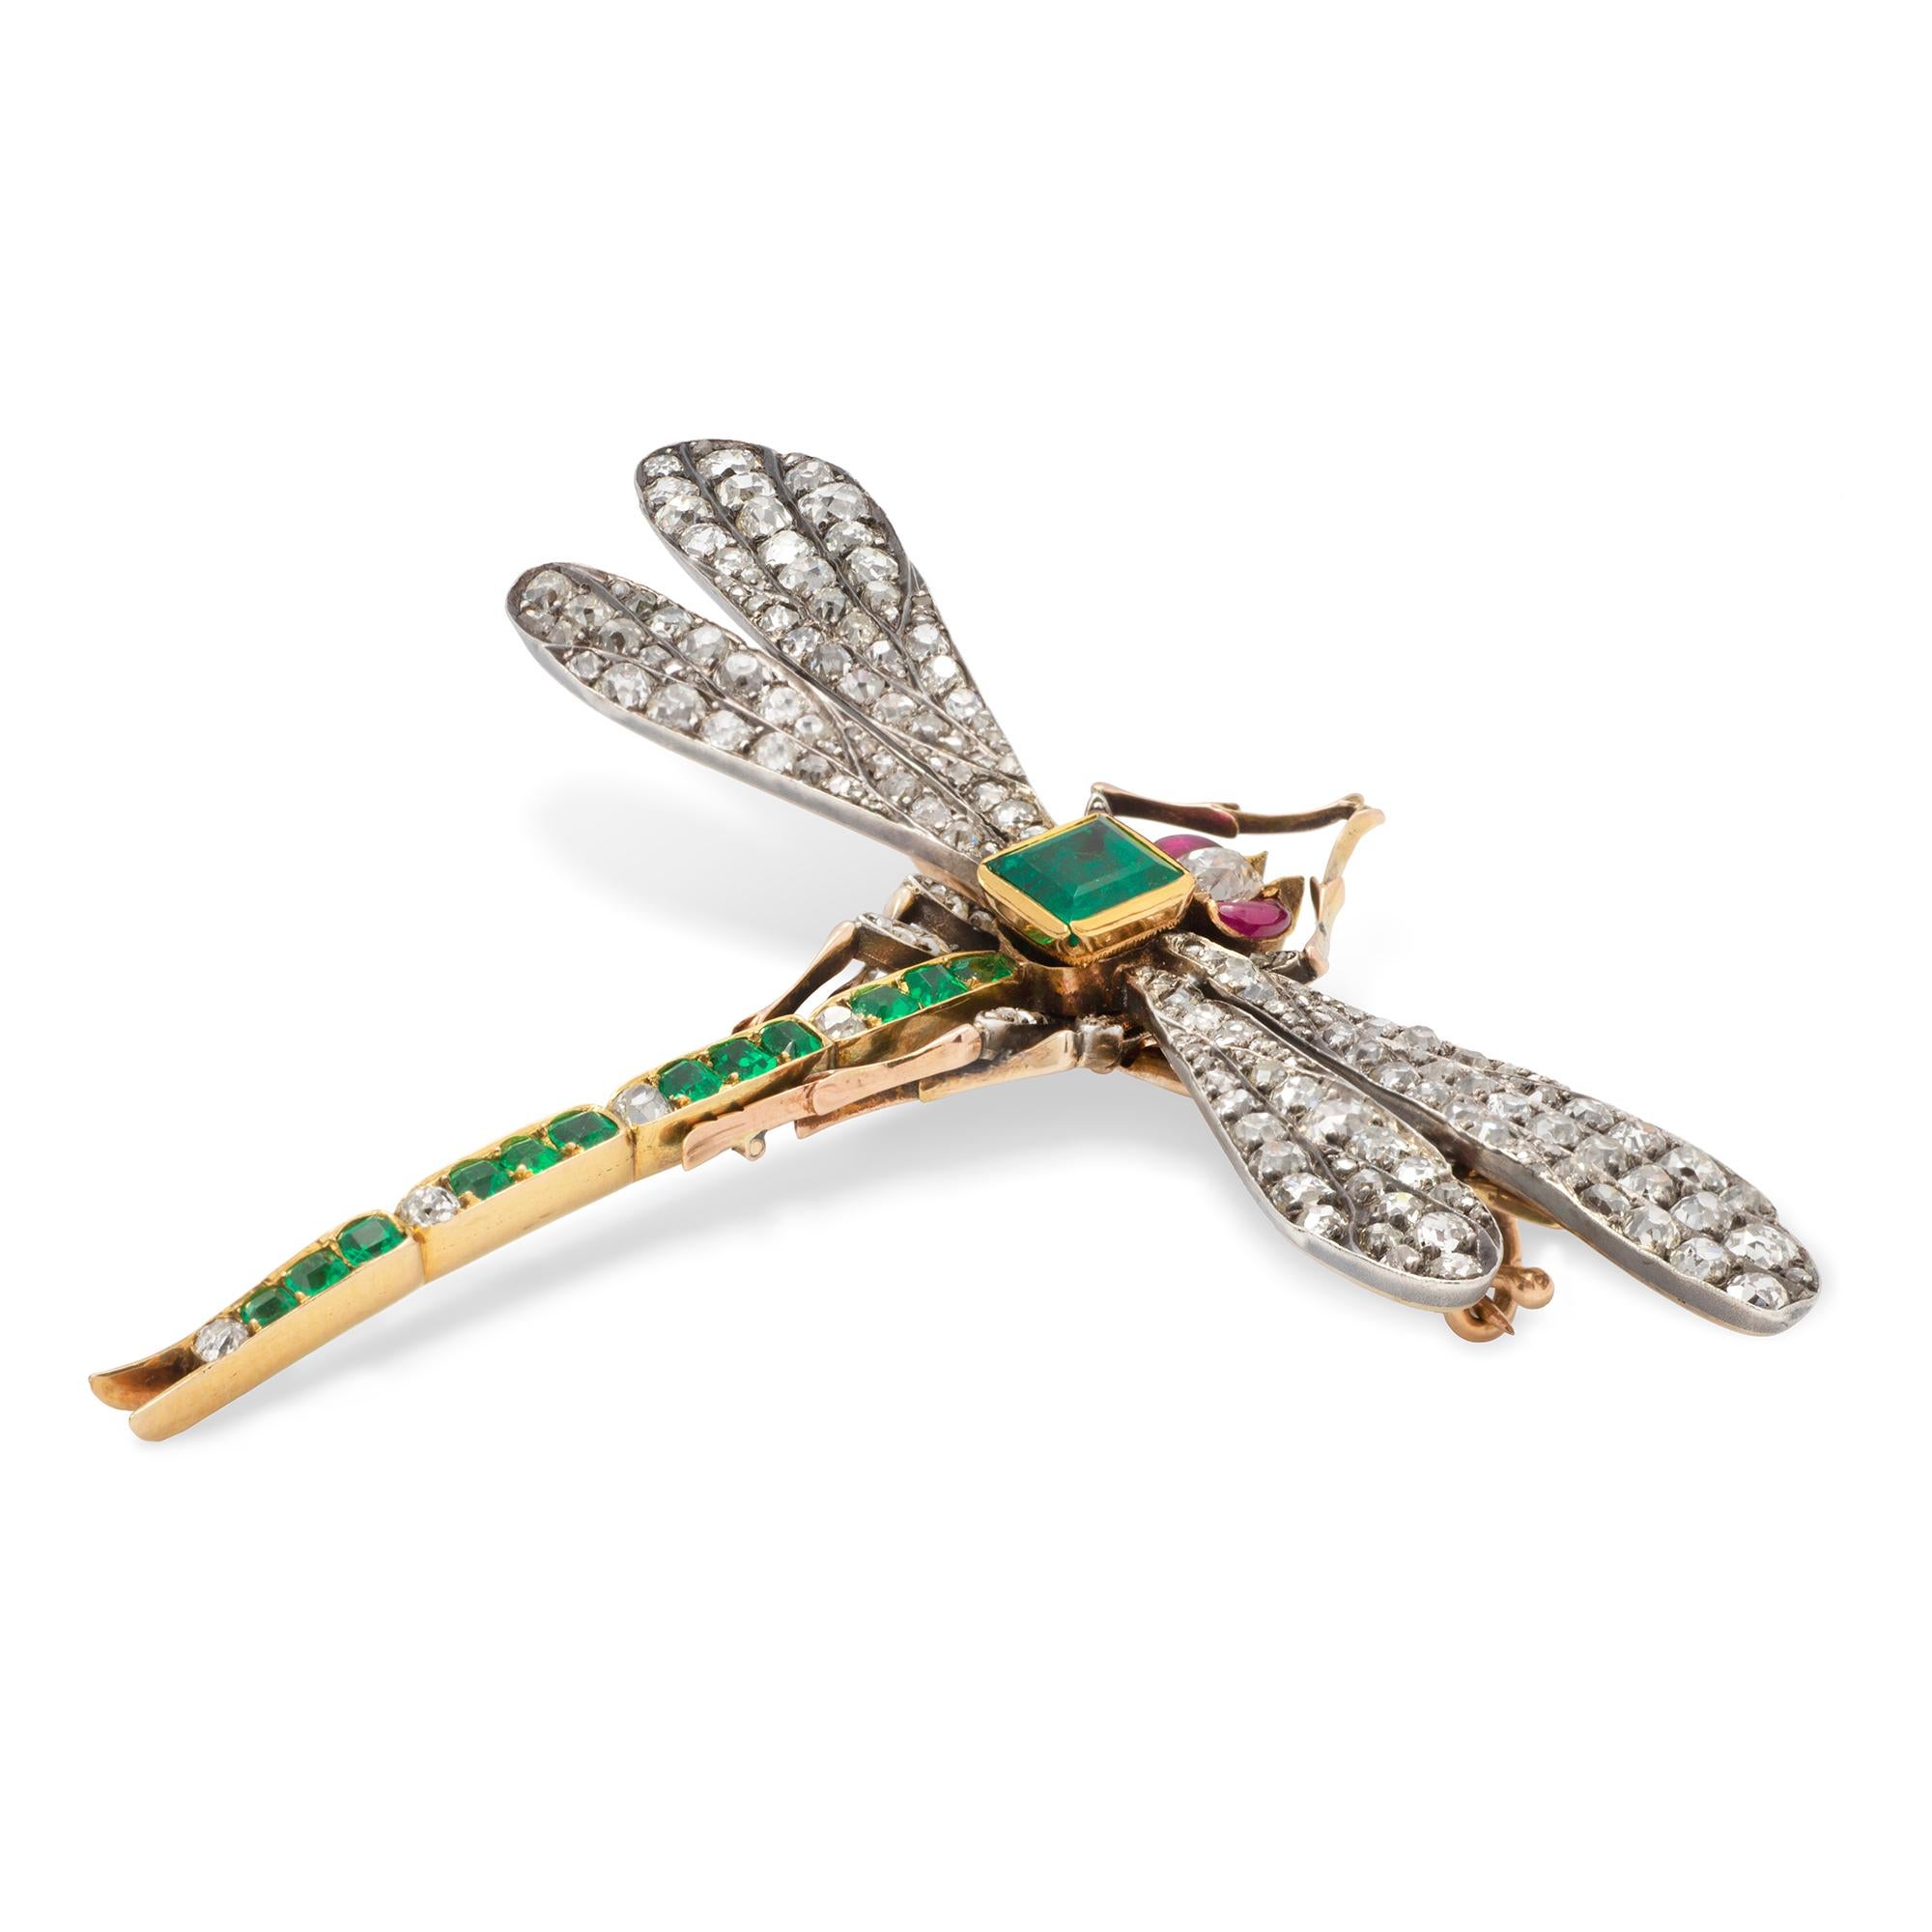 An antique Russian emerald and diamond dragonfly brooch, the body a square-cut emerald with estimated weight 0.6 carats, the tail set with twelve emeralds and four diamonds, the wings and legs set with old-cut and rose-cut diamonds, the eyes a pair